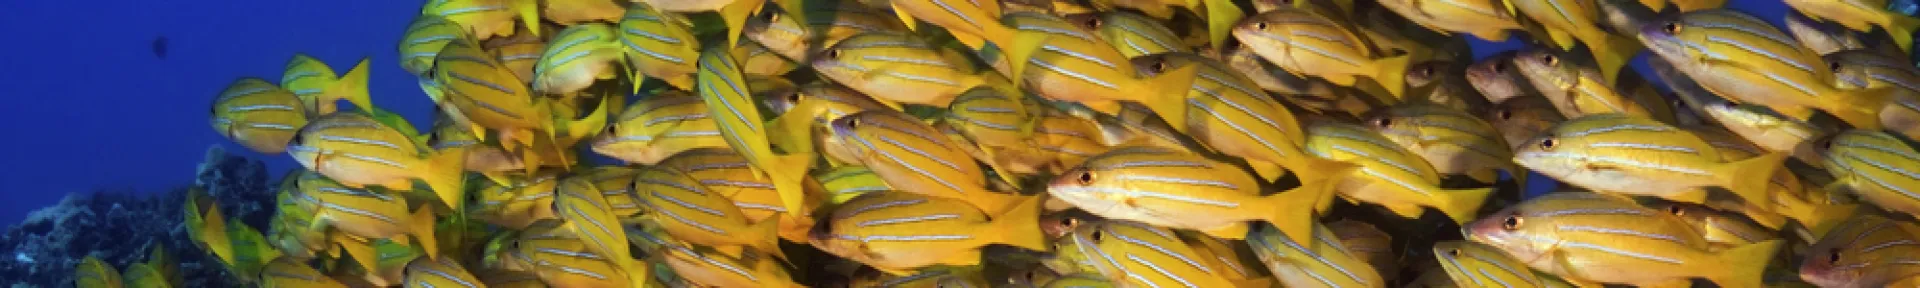 Yellow striped snappers are an invasive species from Fiji